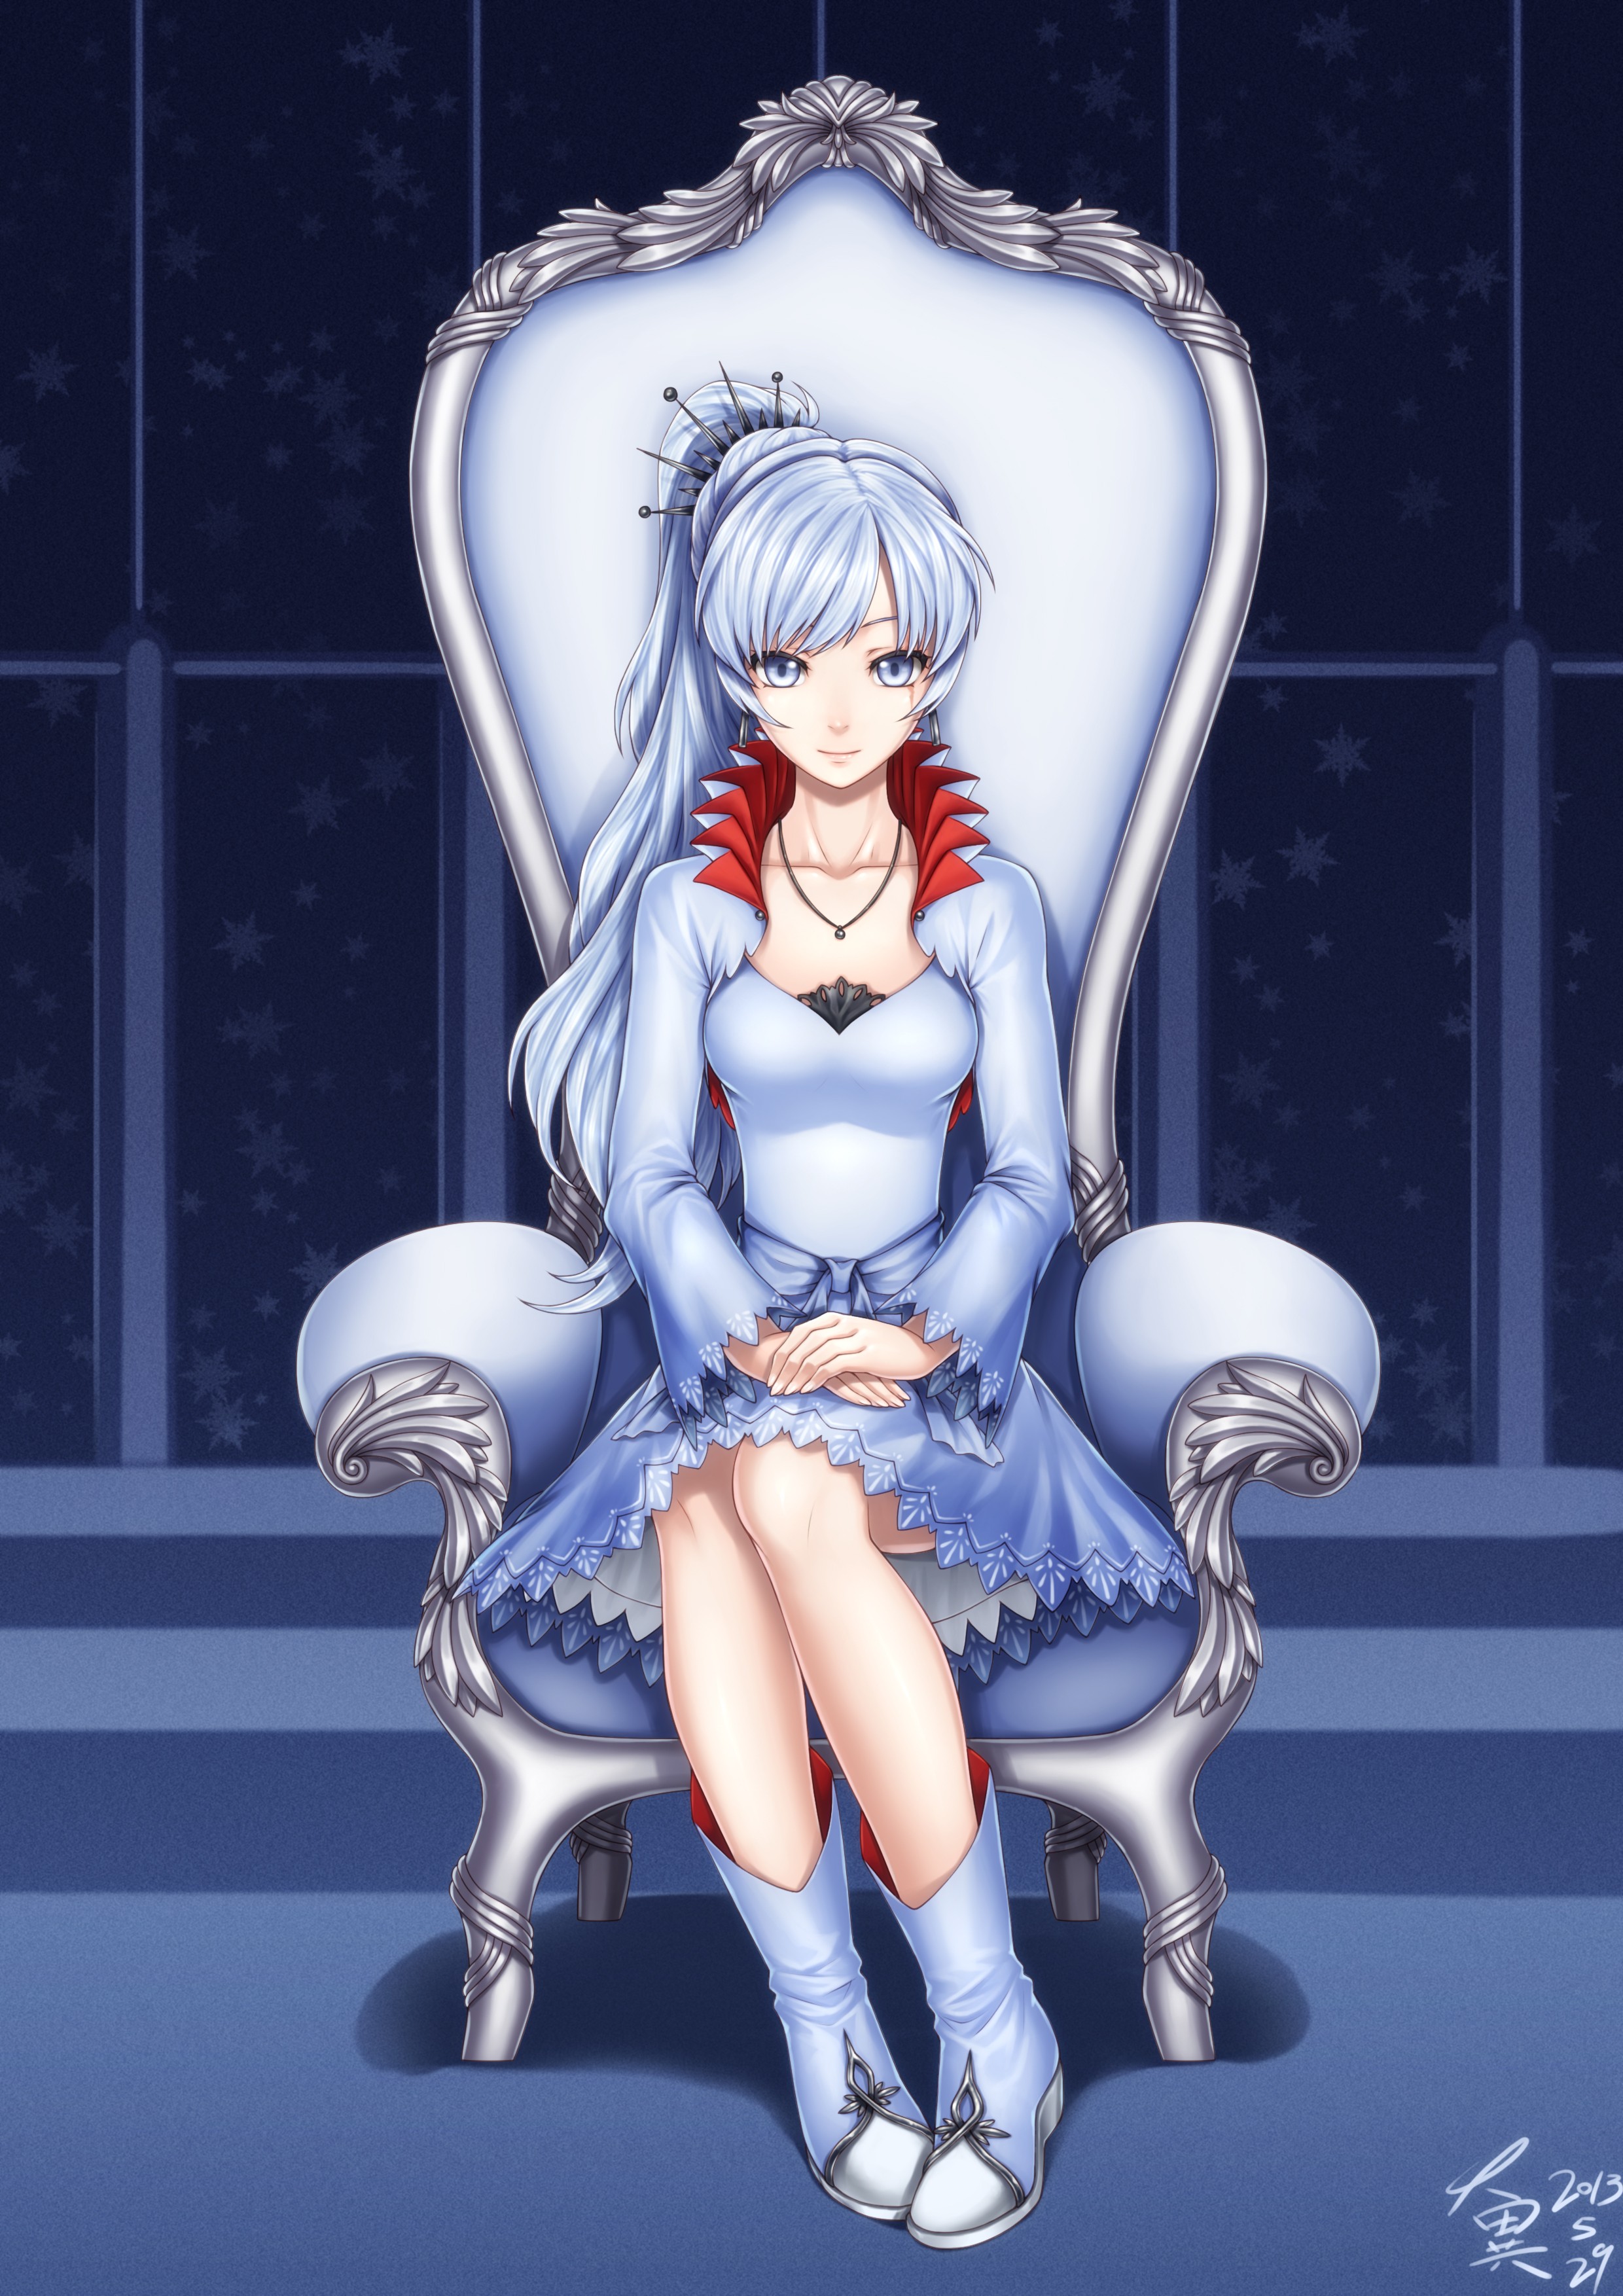 Anime 2480x3508 anime anime girls long hair blue hair blue eyes Weiss Schnee RWBY Pixiv thighs together watermarked sitting dress